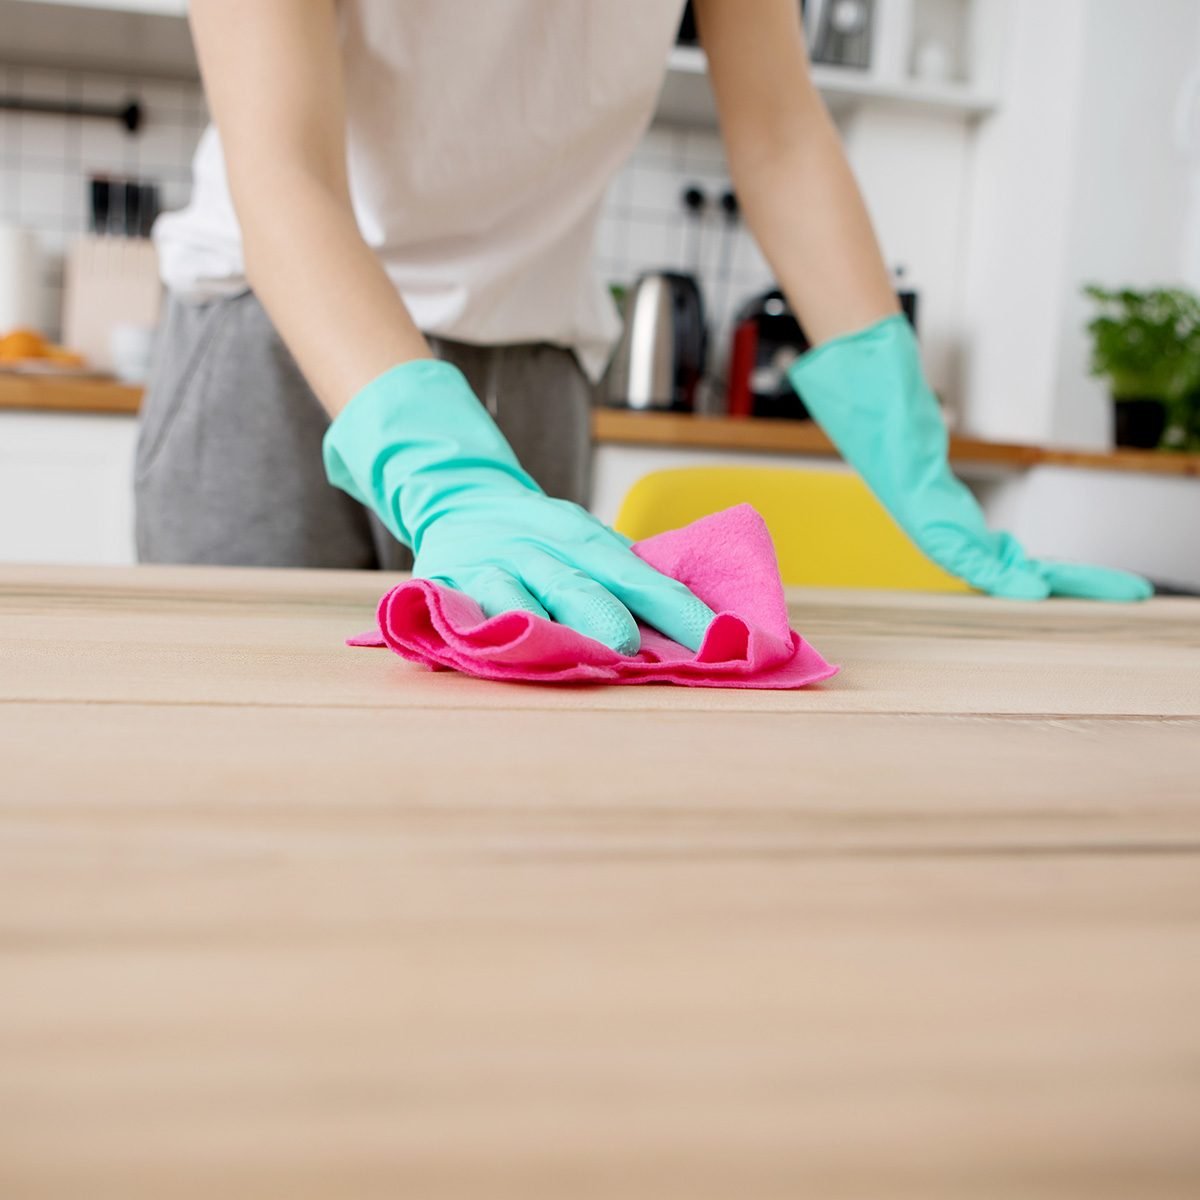 How To Clean Baseboards: Hacks & Tips — Pro Housekeepers